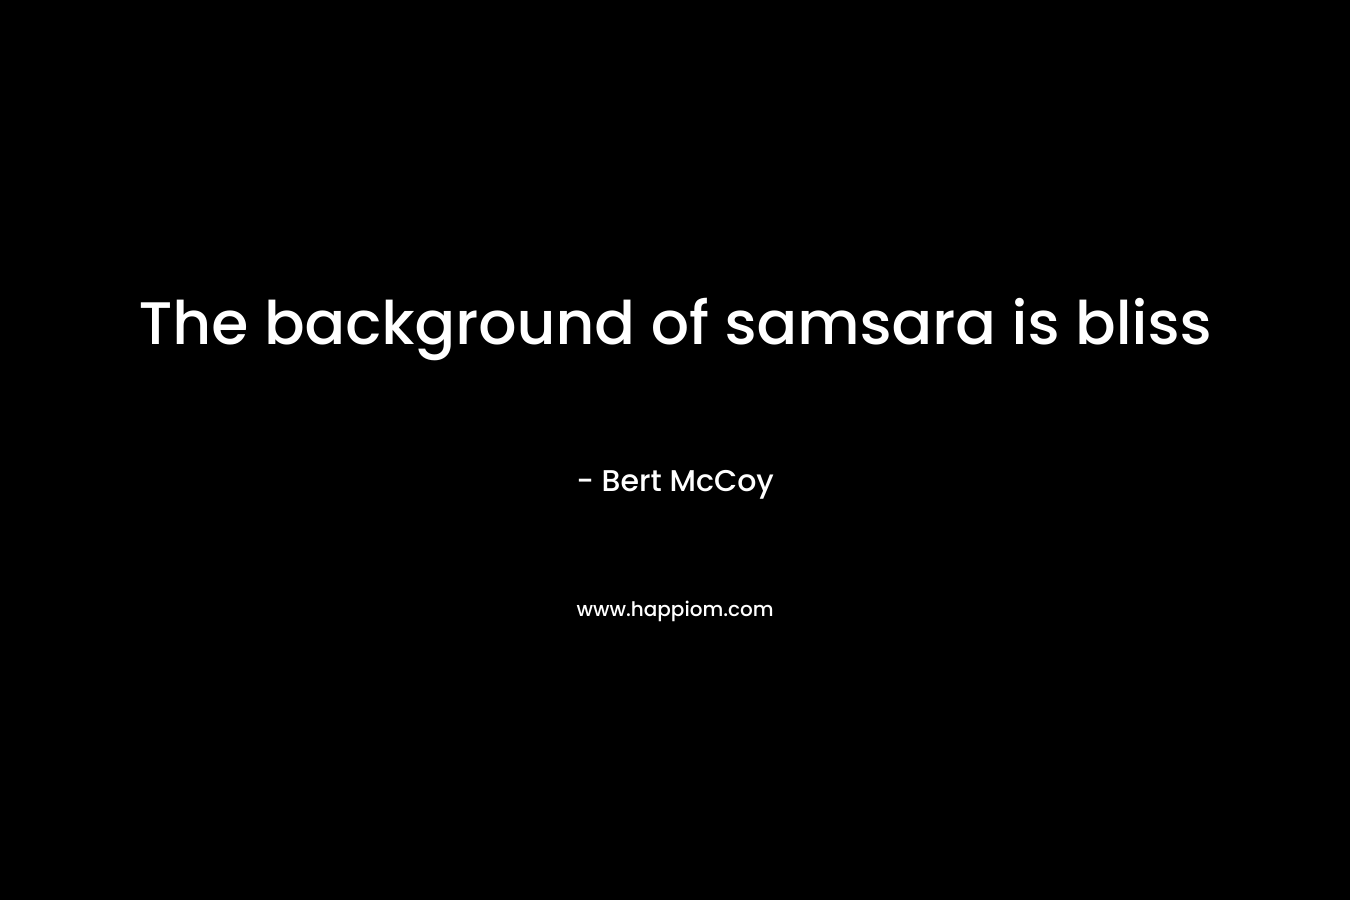 The background of samsara is bliss